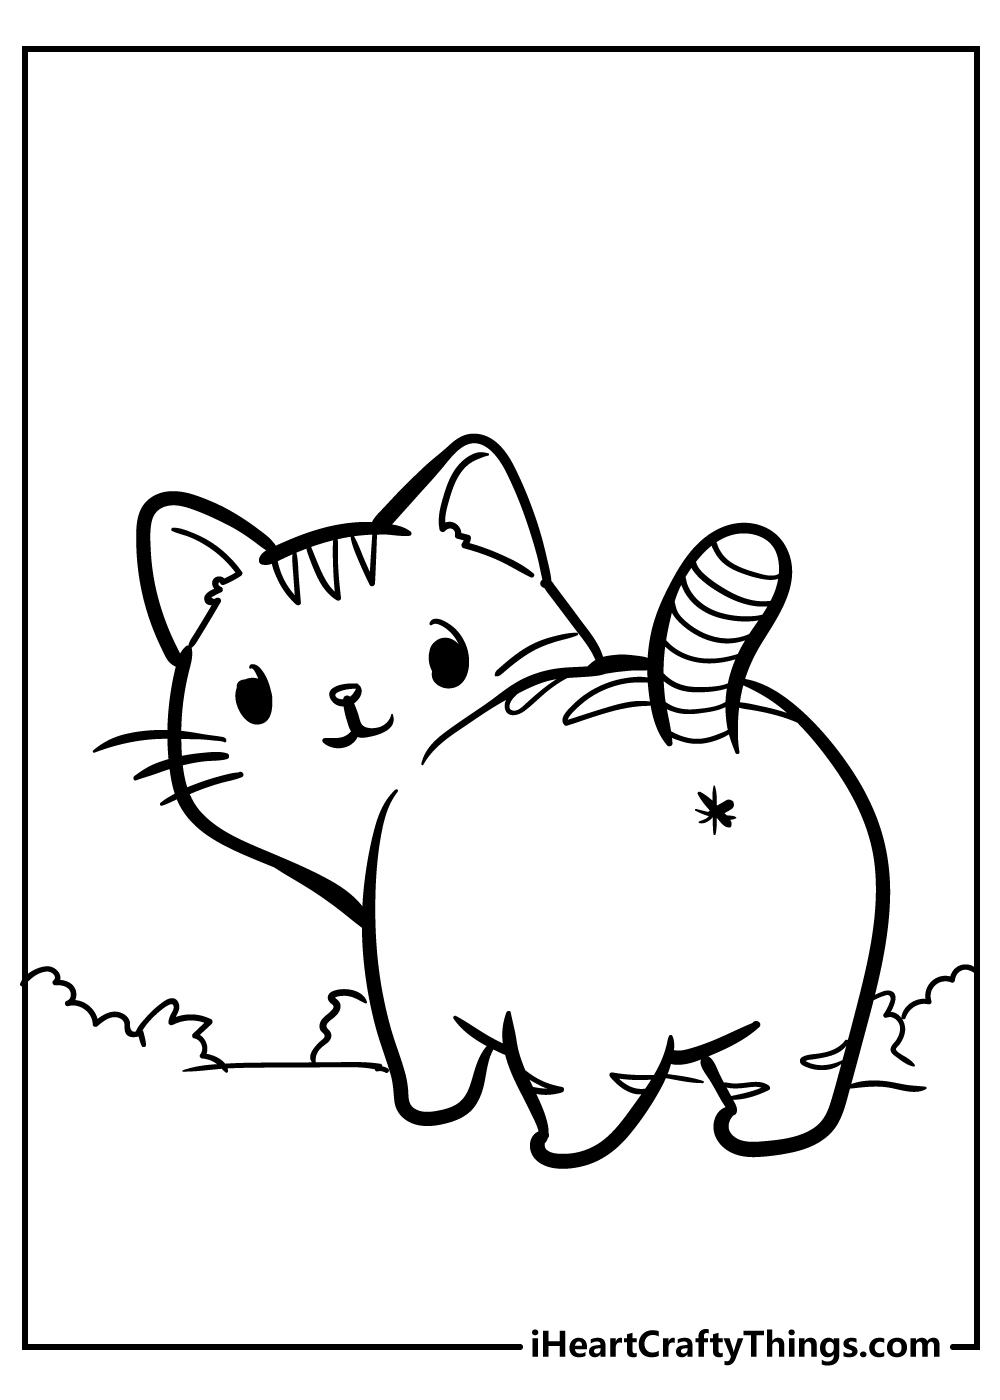 Kitten coloring pages free printables